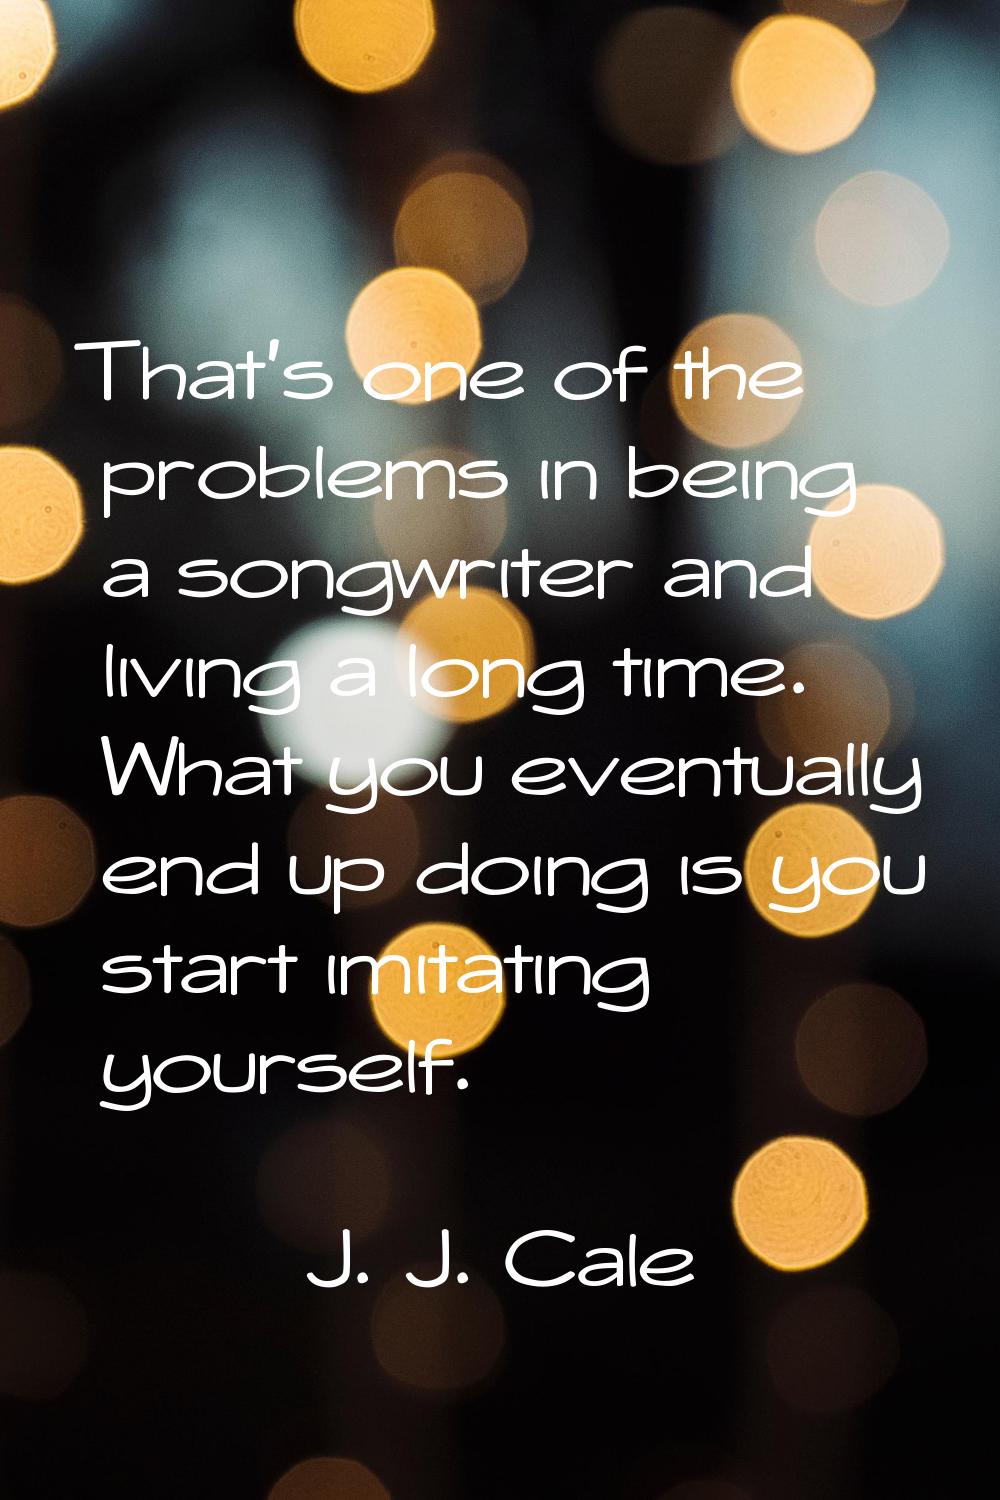 That's one of the problems in being a songwriter and living a long time. What you eventually end up